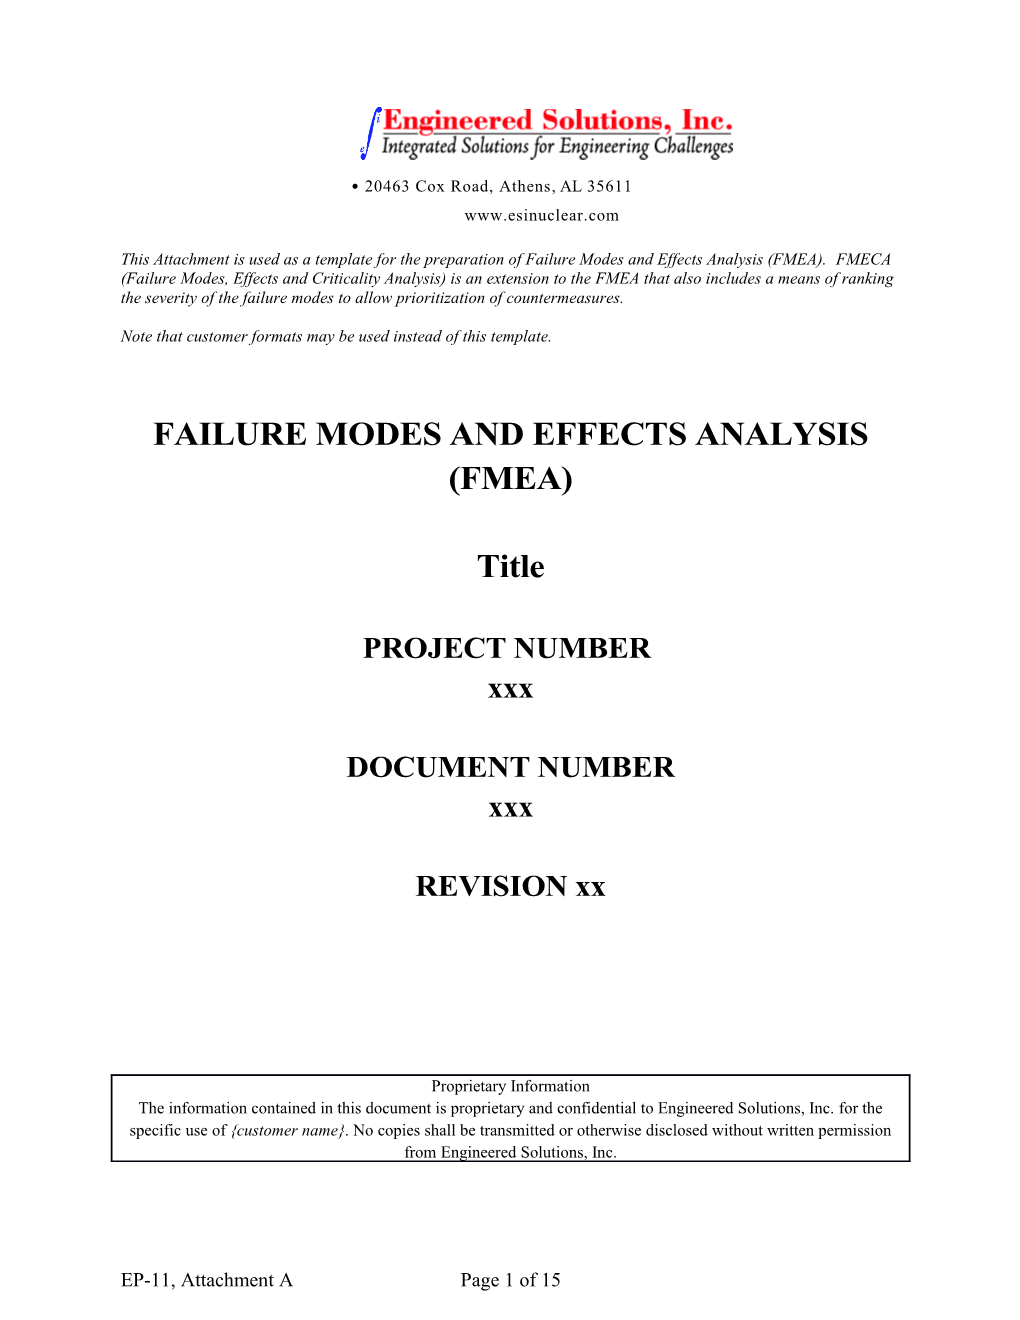 Failure Modes and Effects Analysis (Fmea)